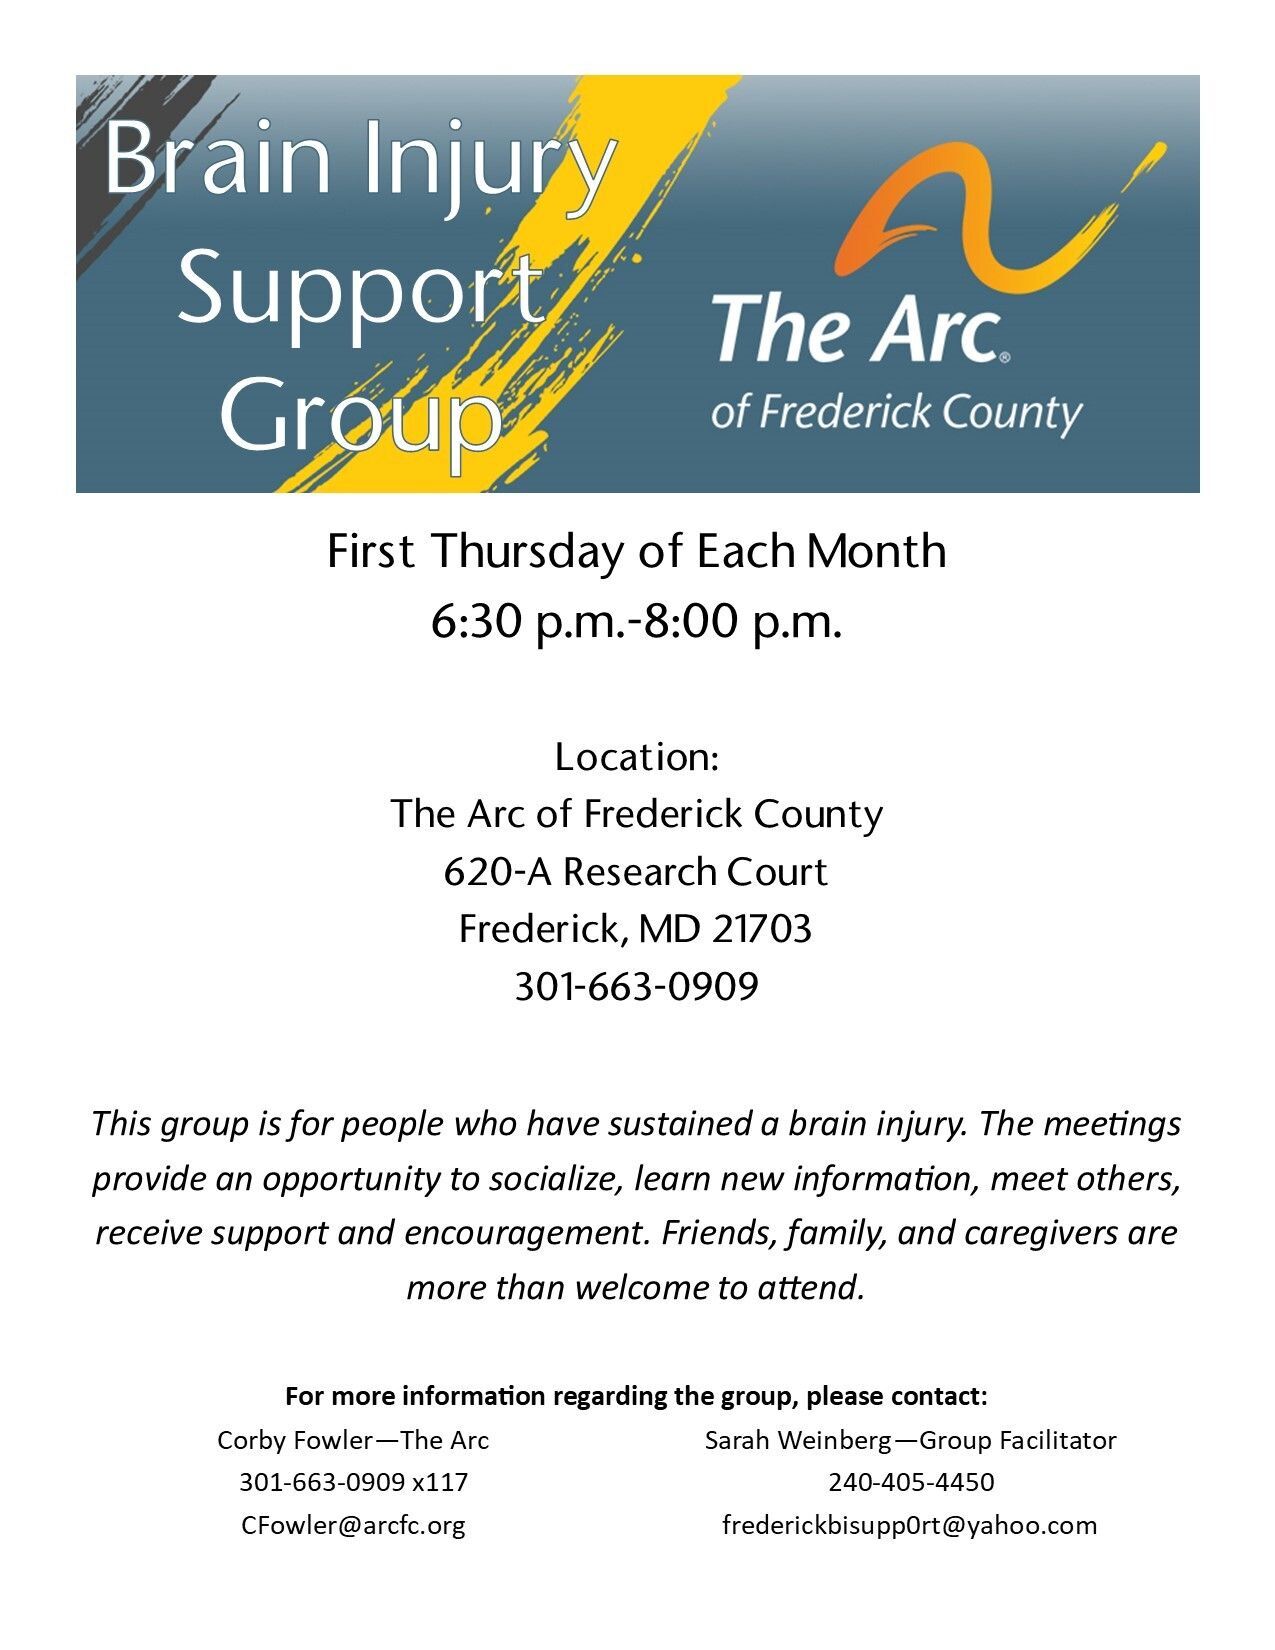 TBI Support Group